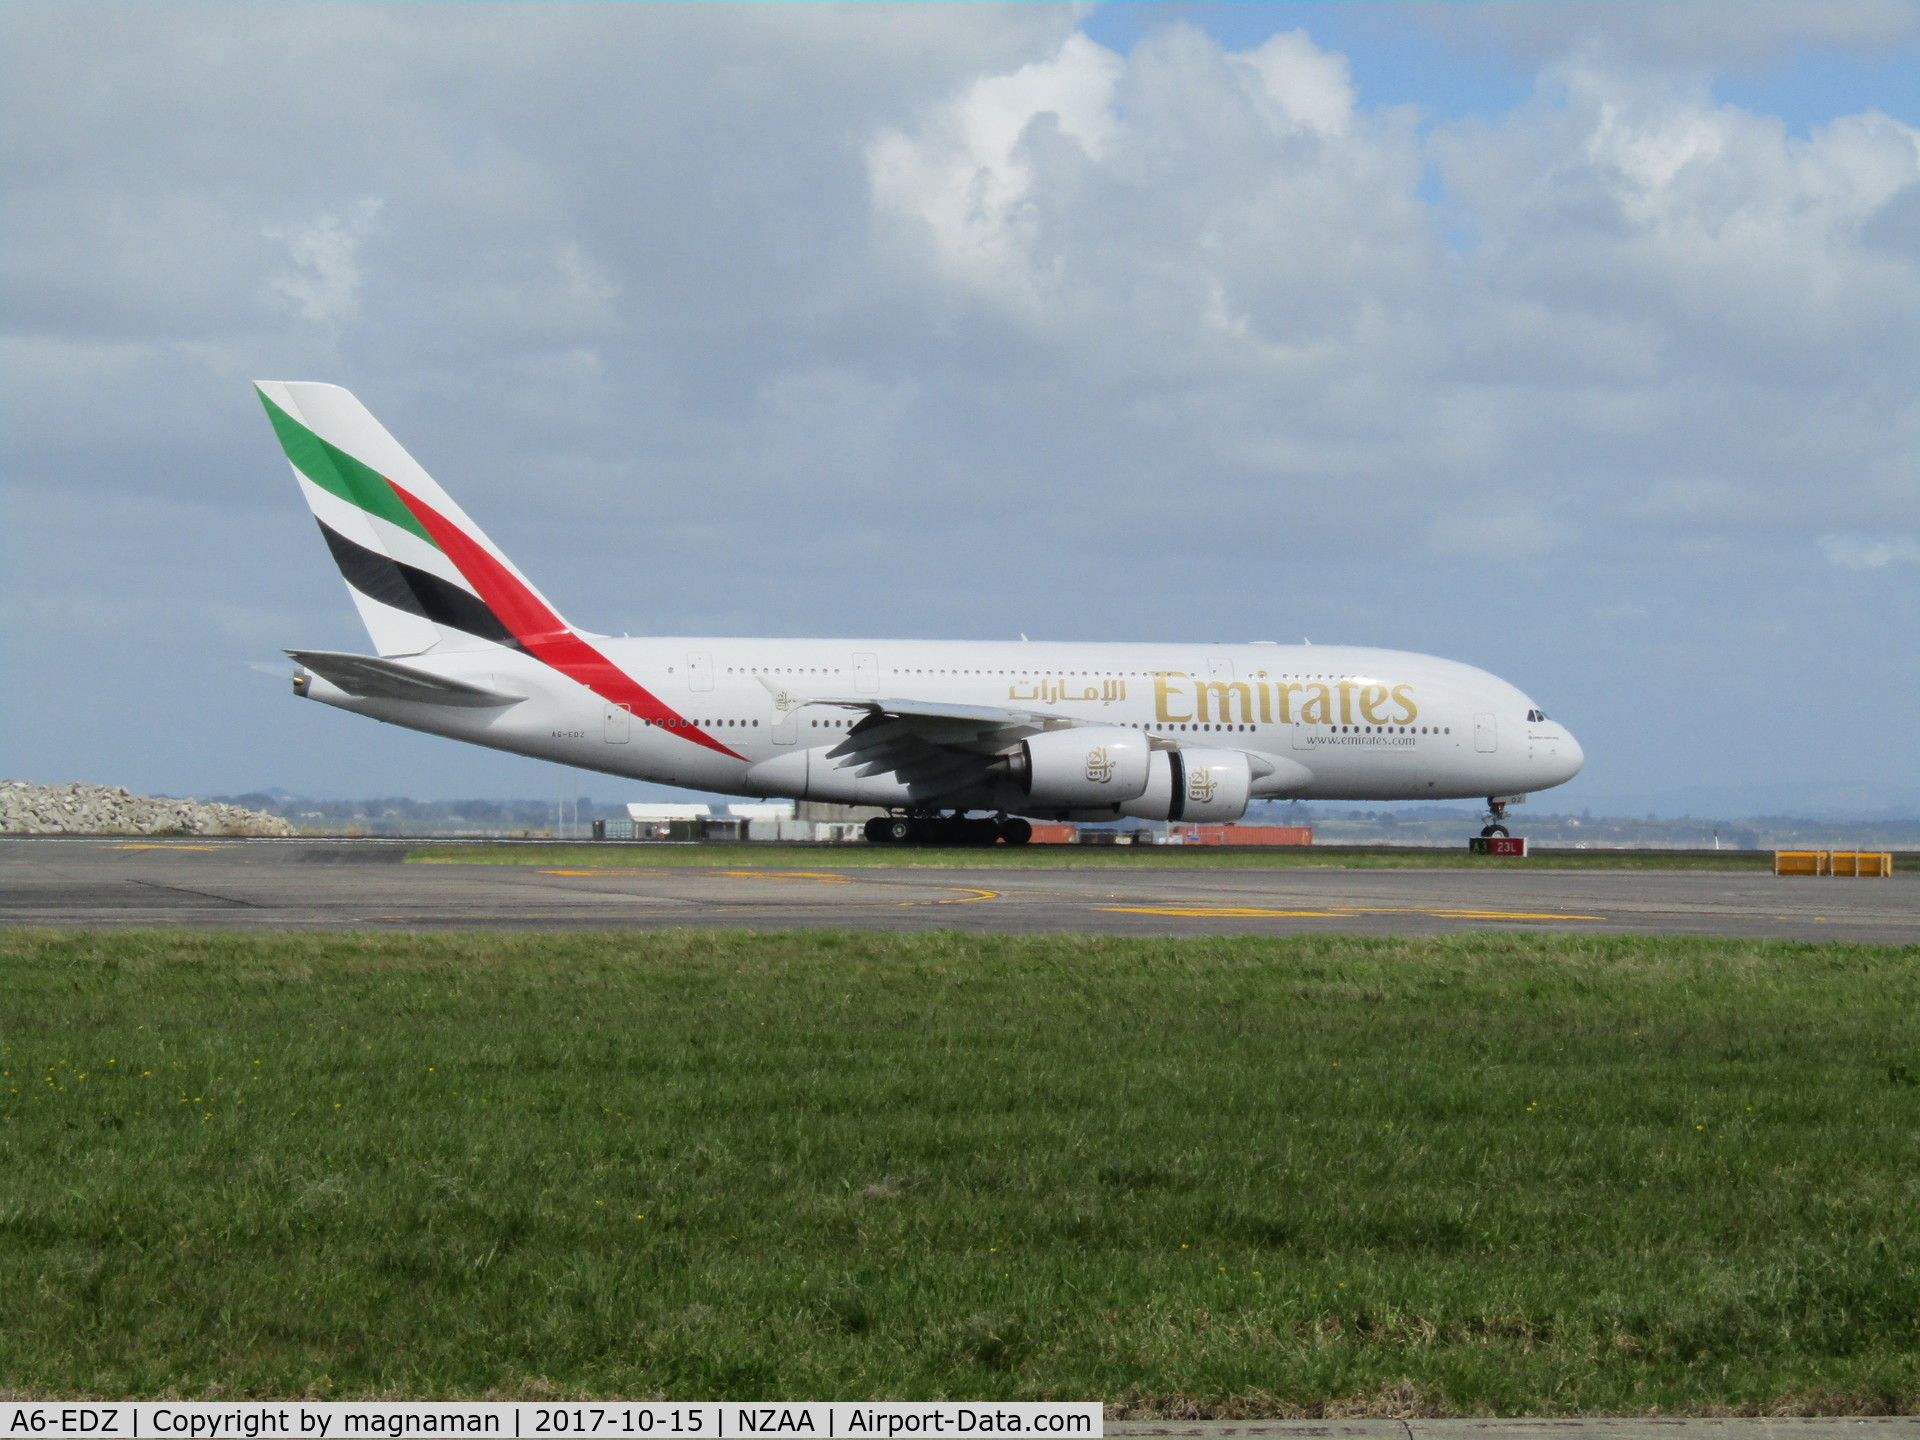 A6-EDZ, 2012 Airbus A380-861 C/N 107, just touched down at AKL